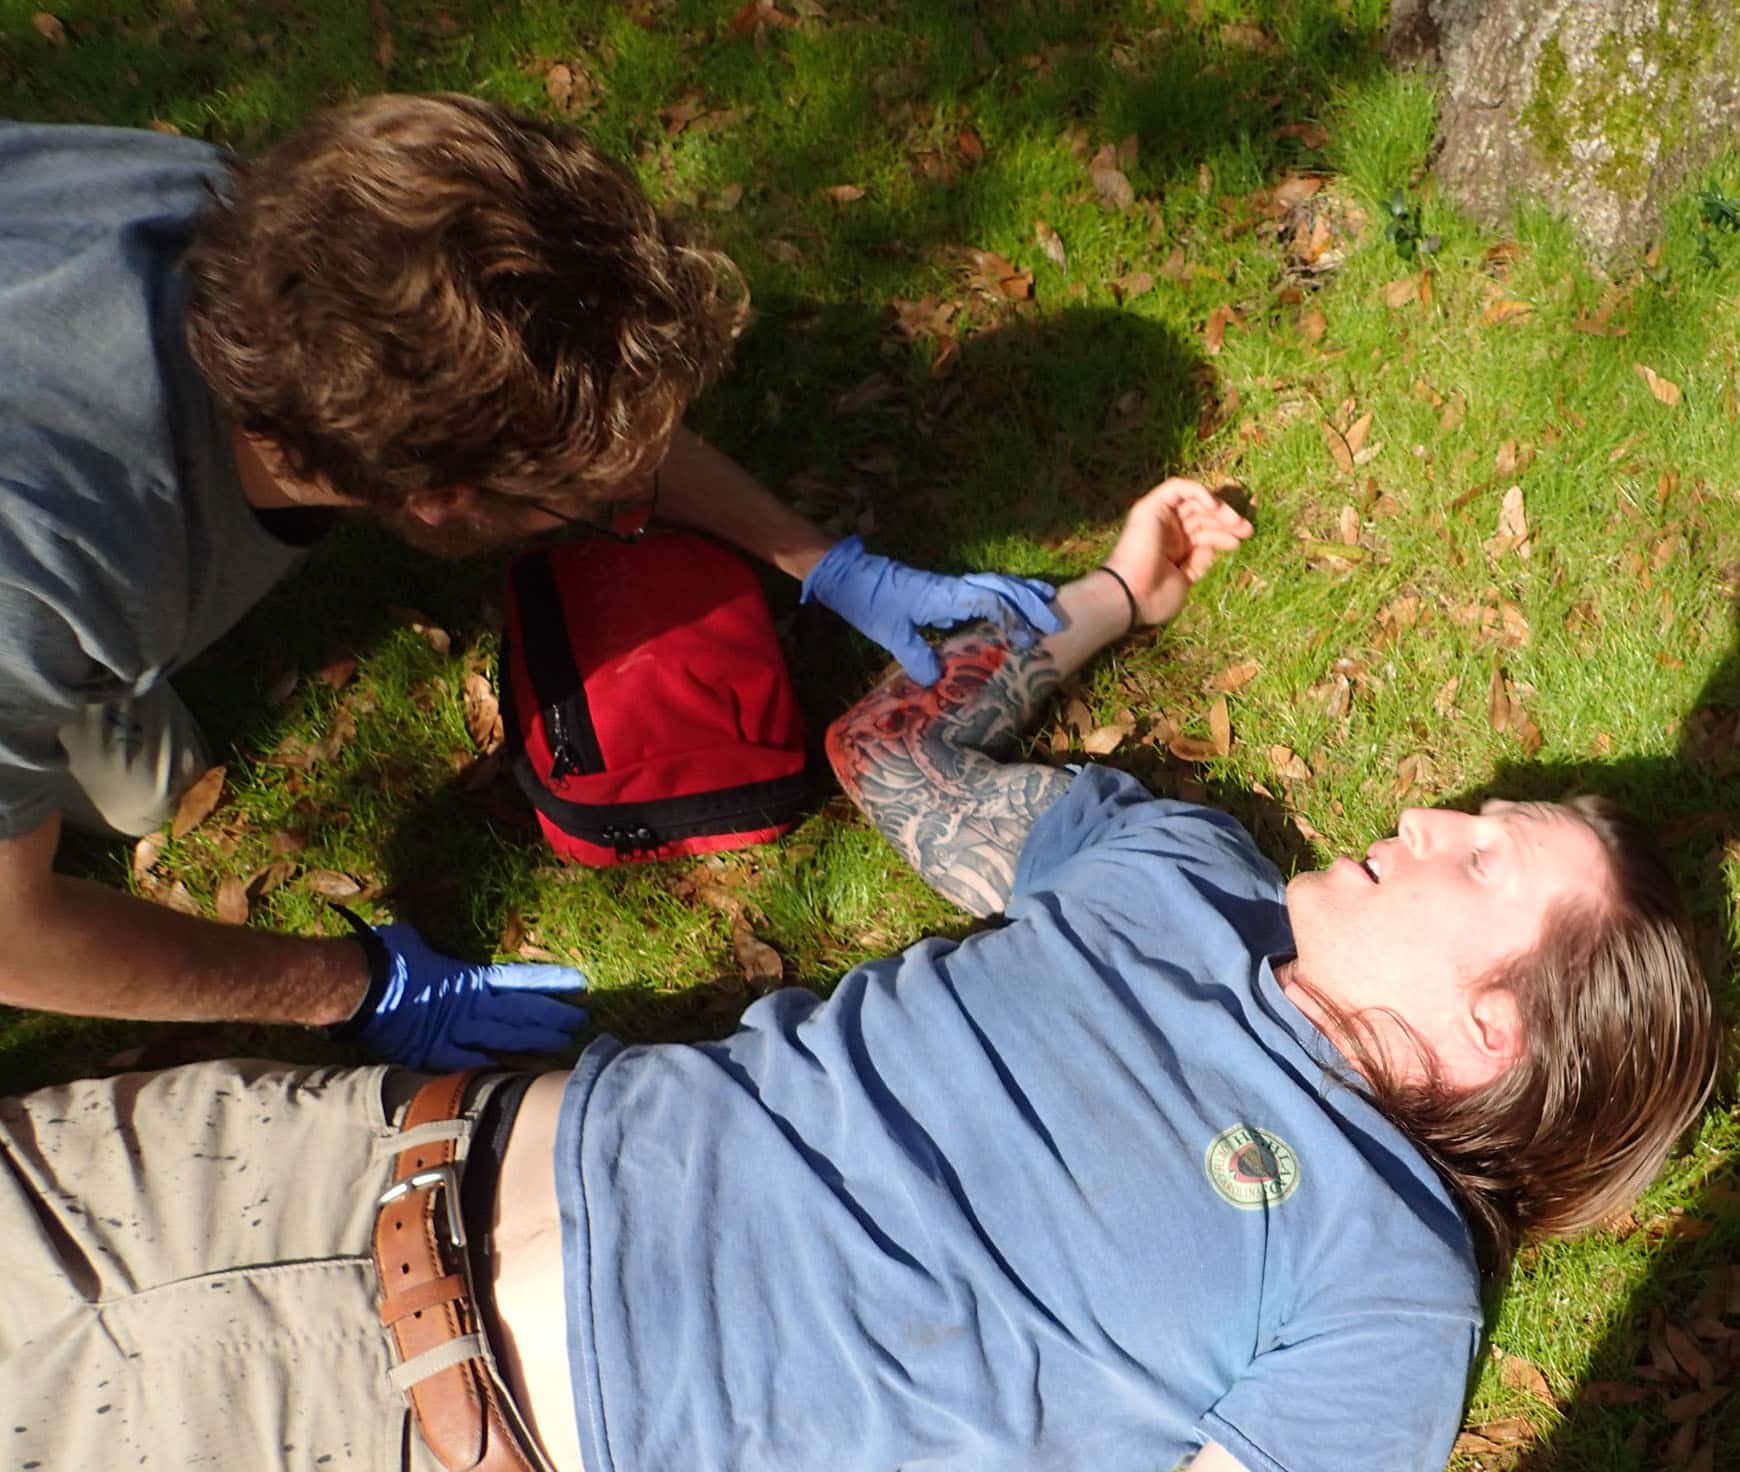 A wilderness medicine personnel examining a patient in a field.